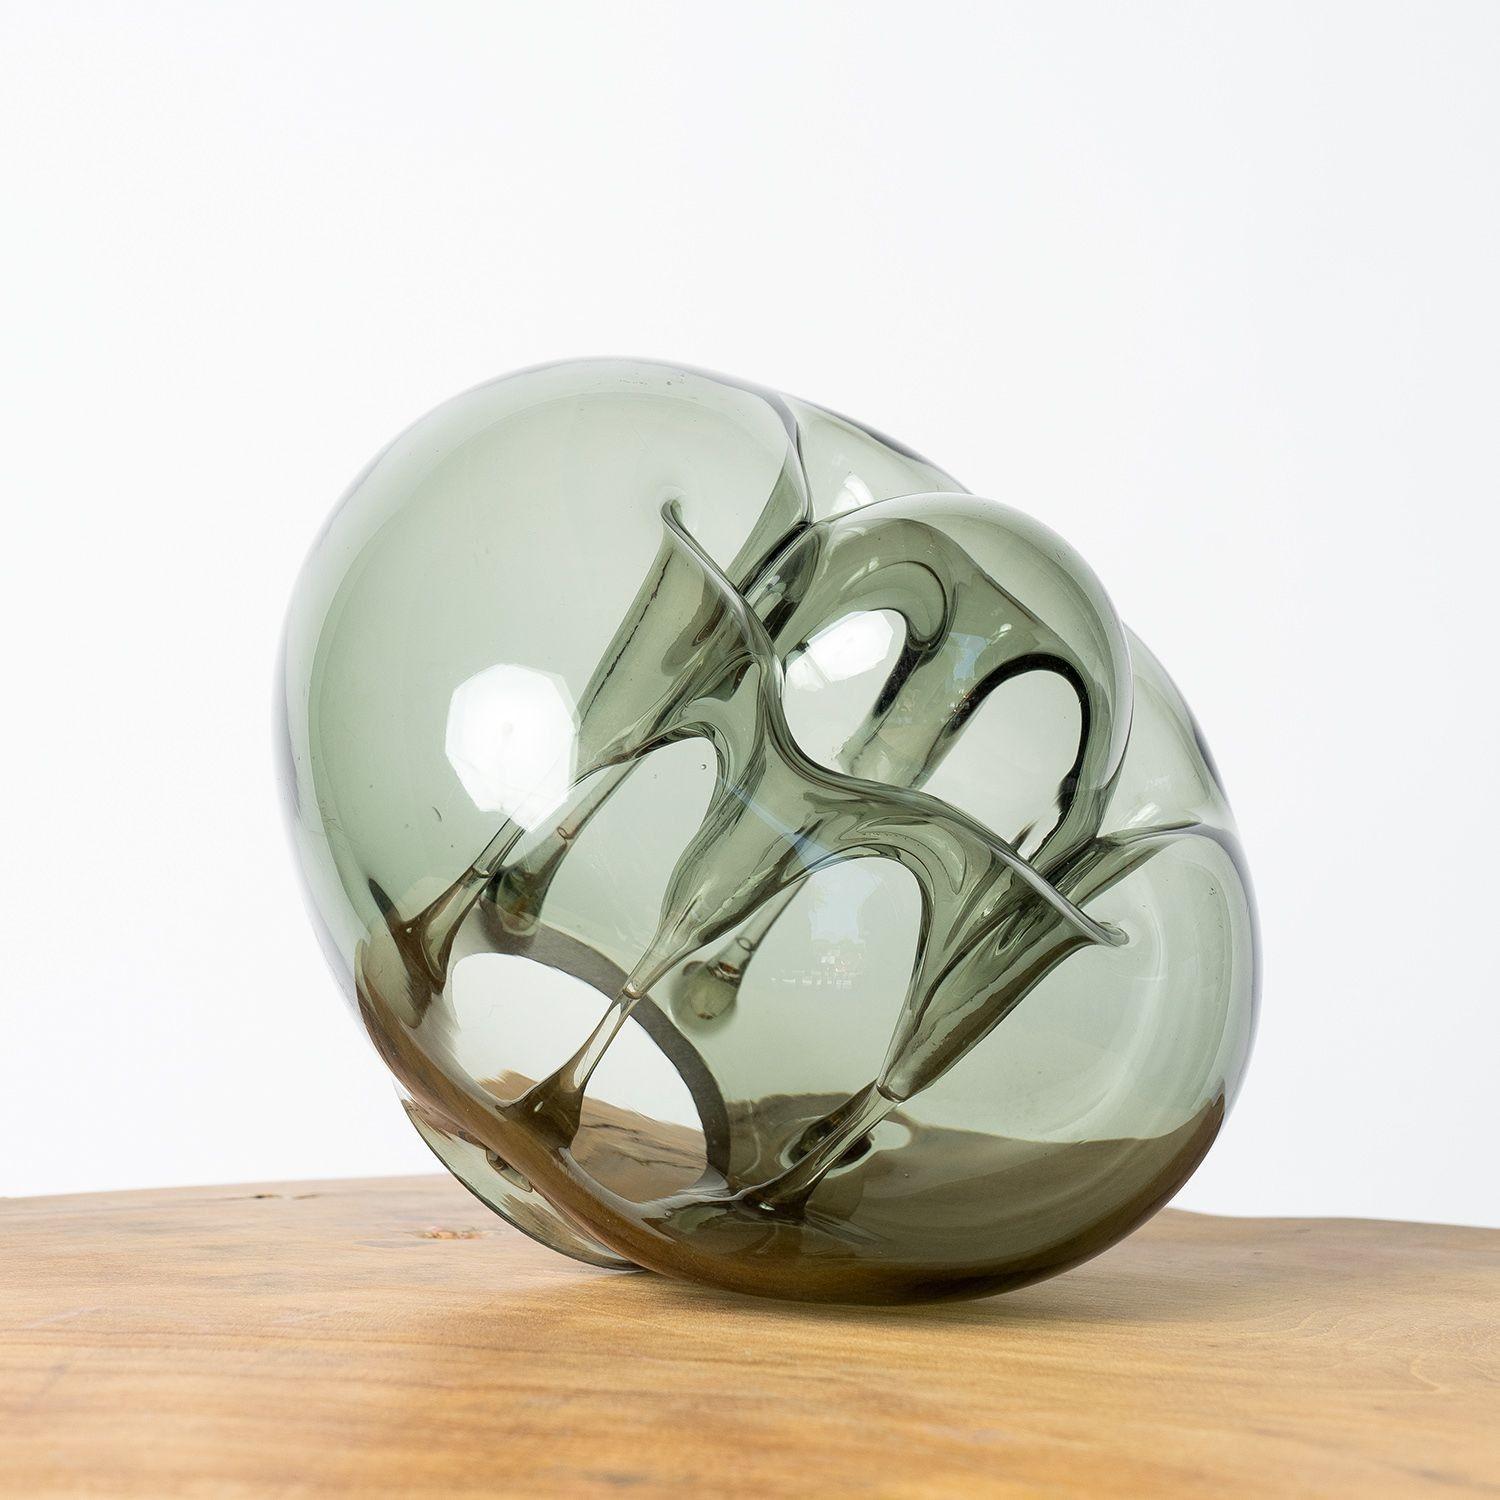 20th Century 'Ikebana' Hand-Blown Smoked Glass Sculpture by Dragan Drobnjak, 1970s